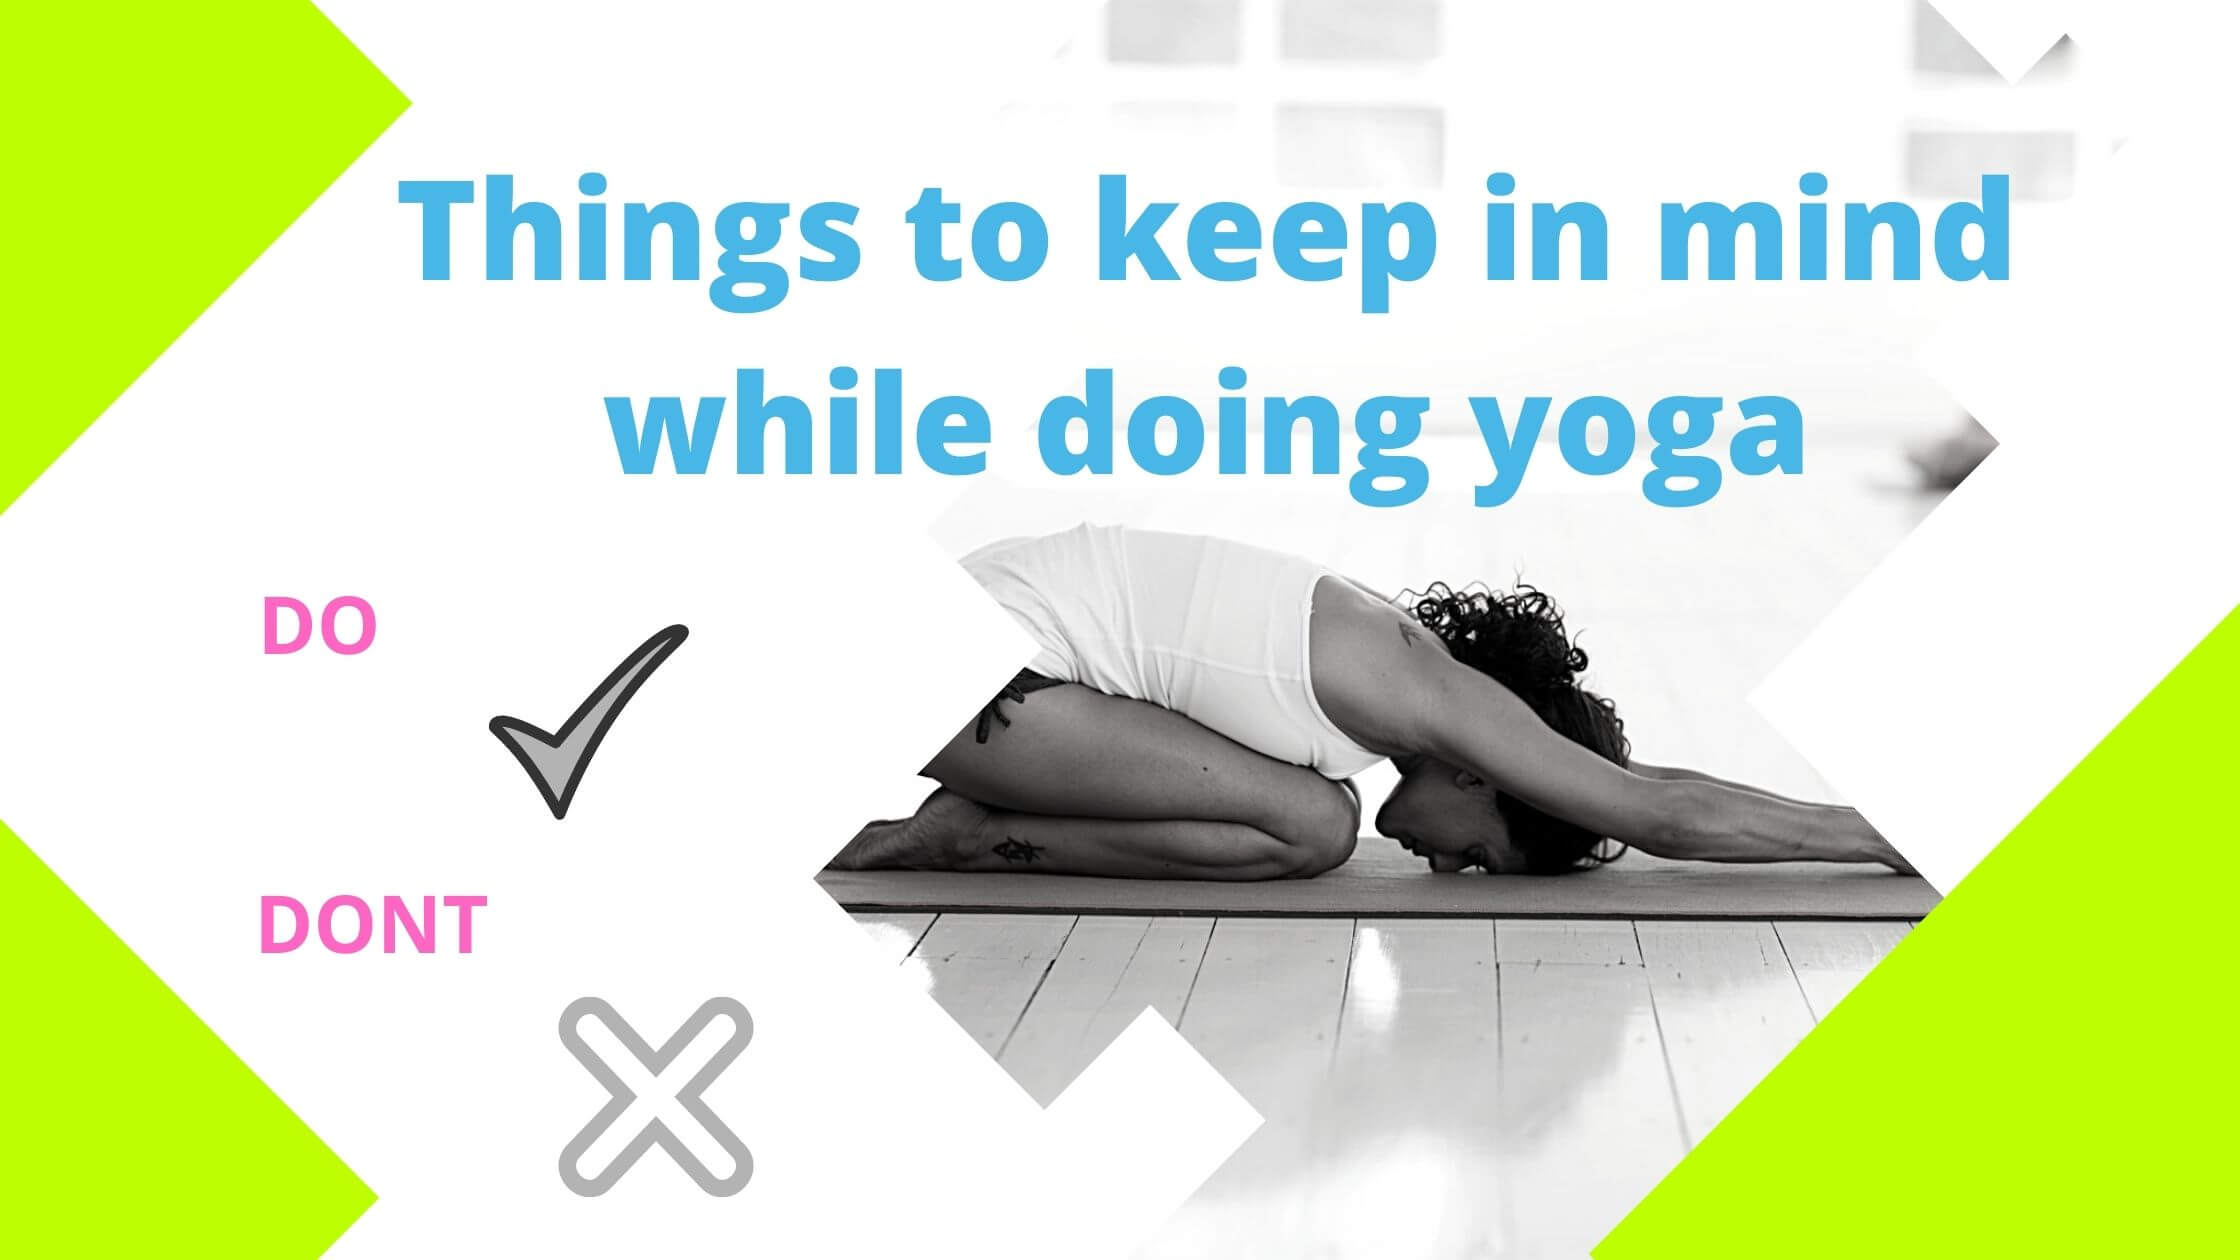 Do's and Don'ts of Yoga